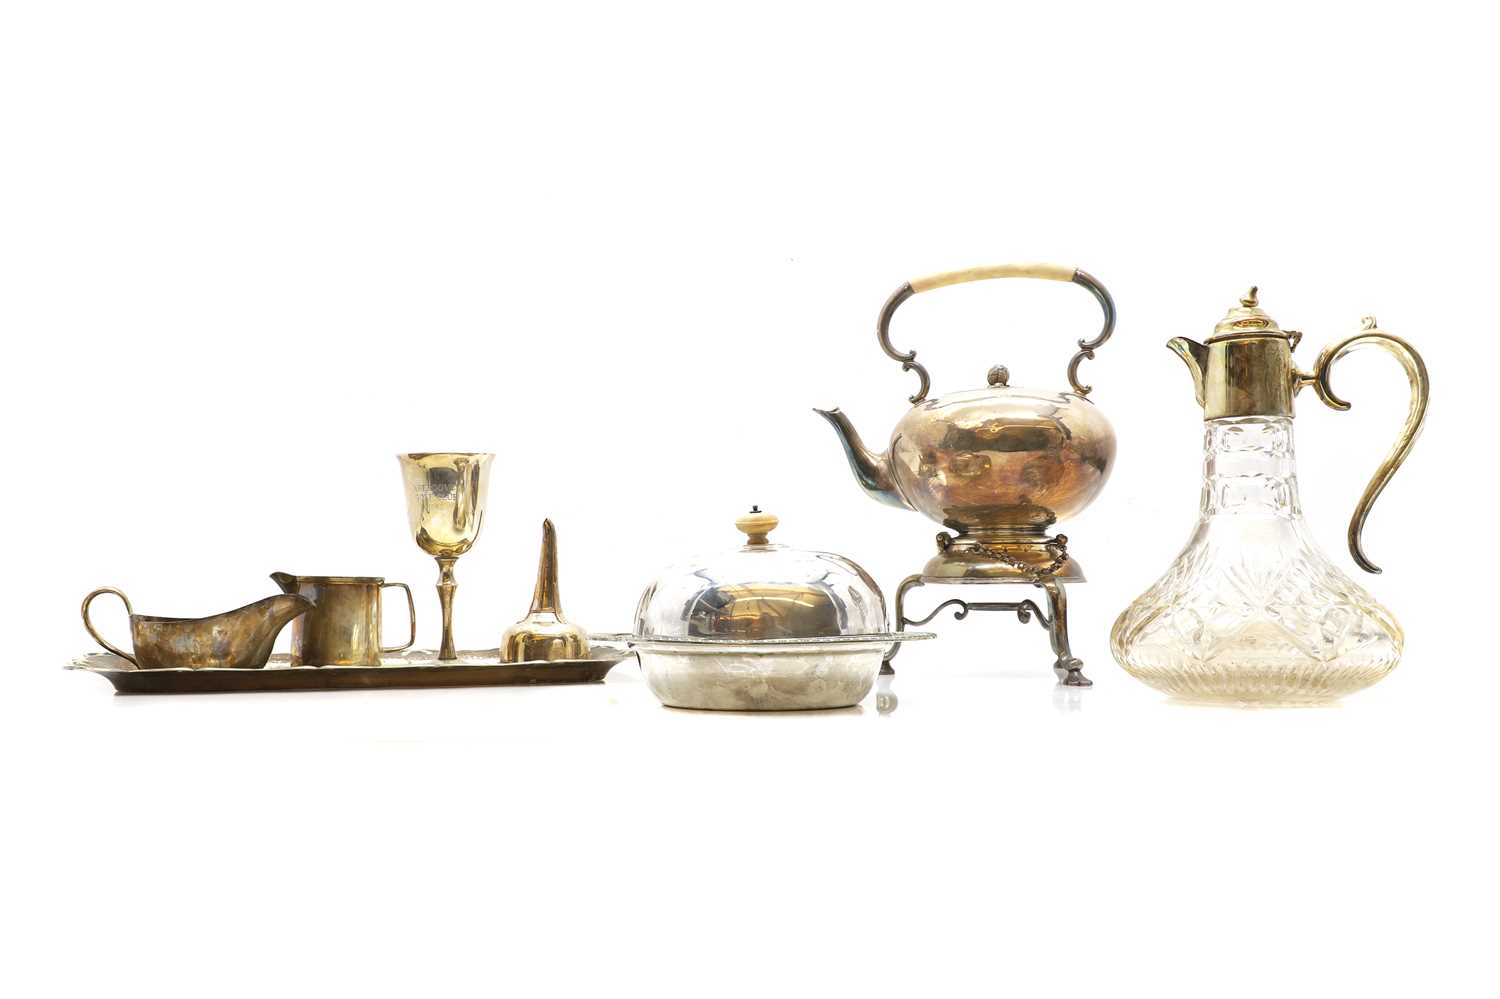 Lot 85 - A collection of silver-plated items